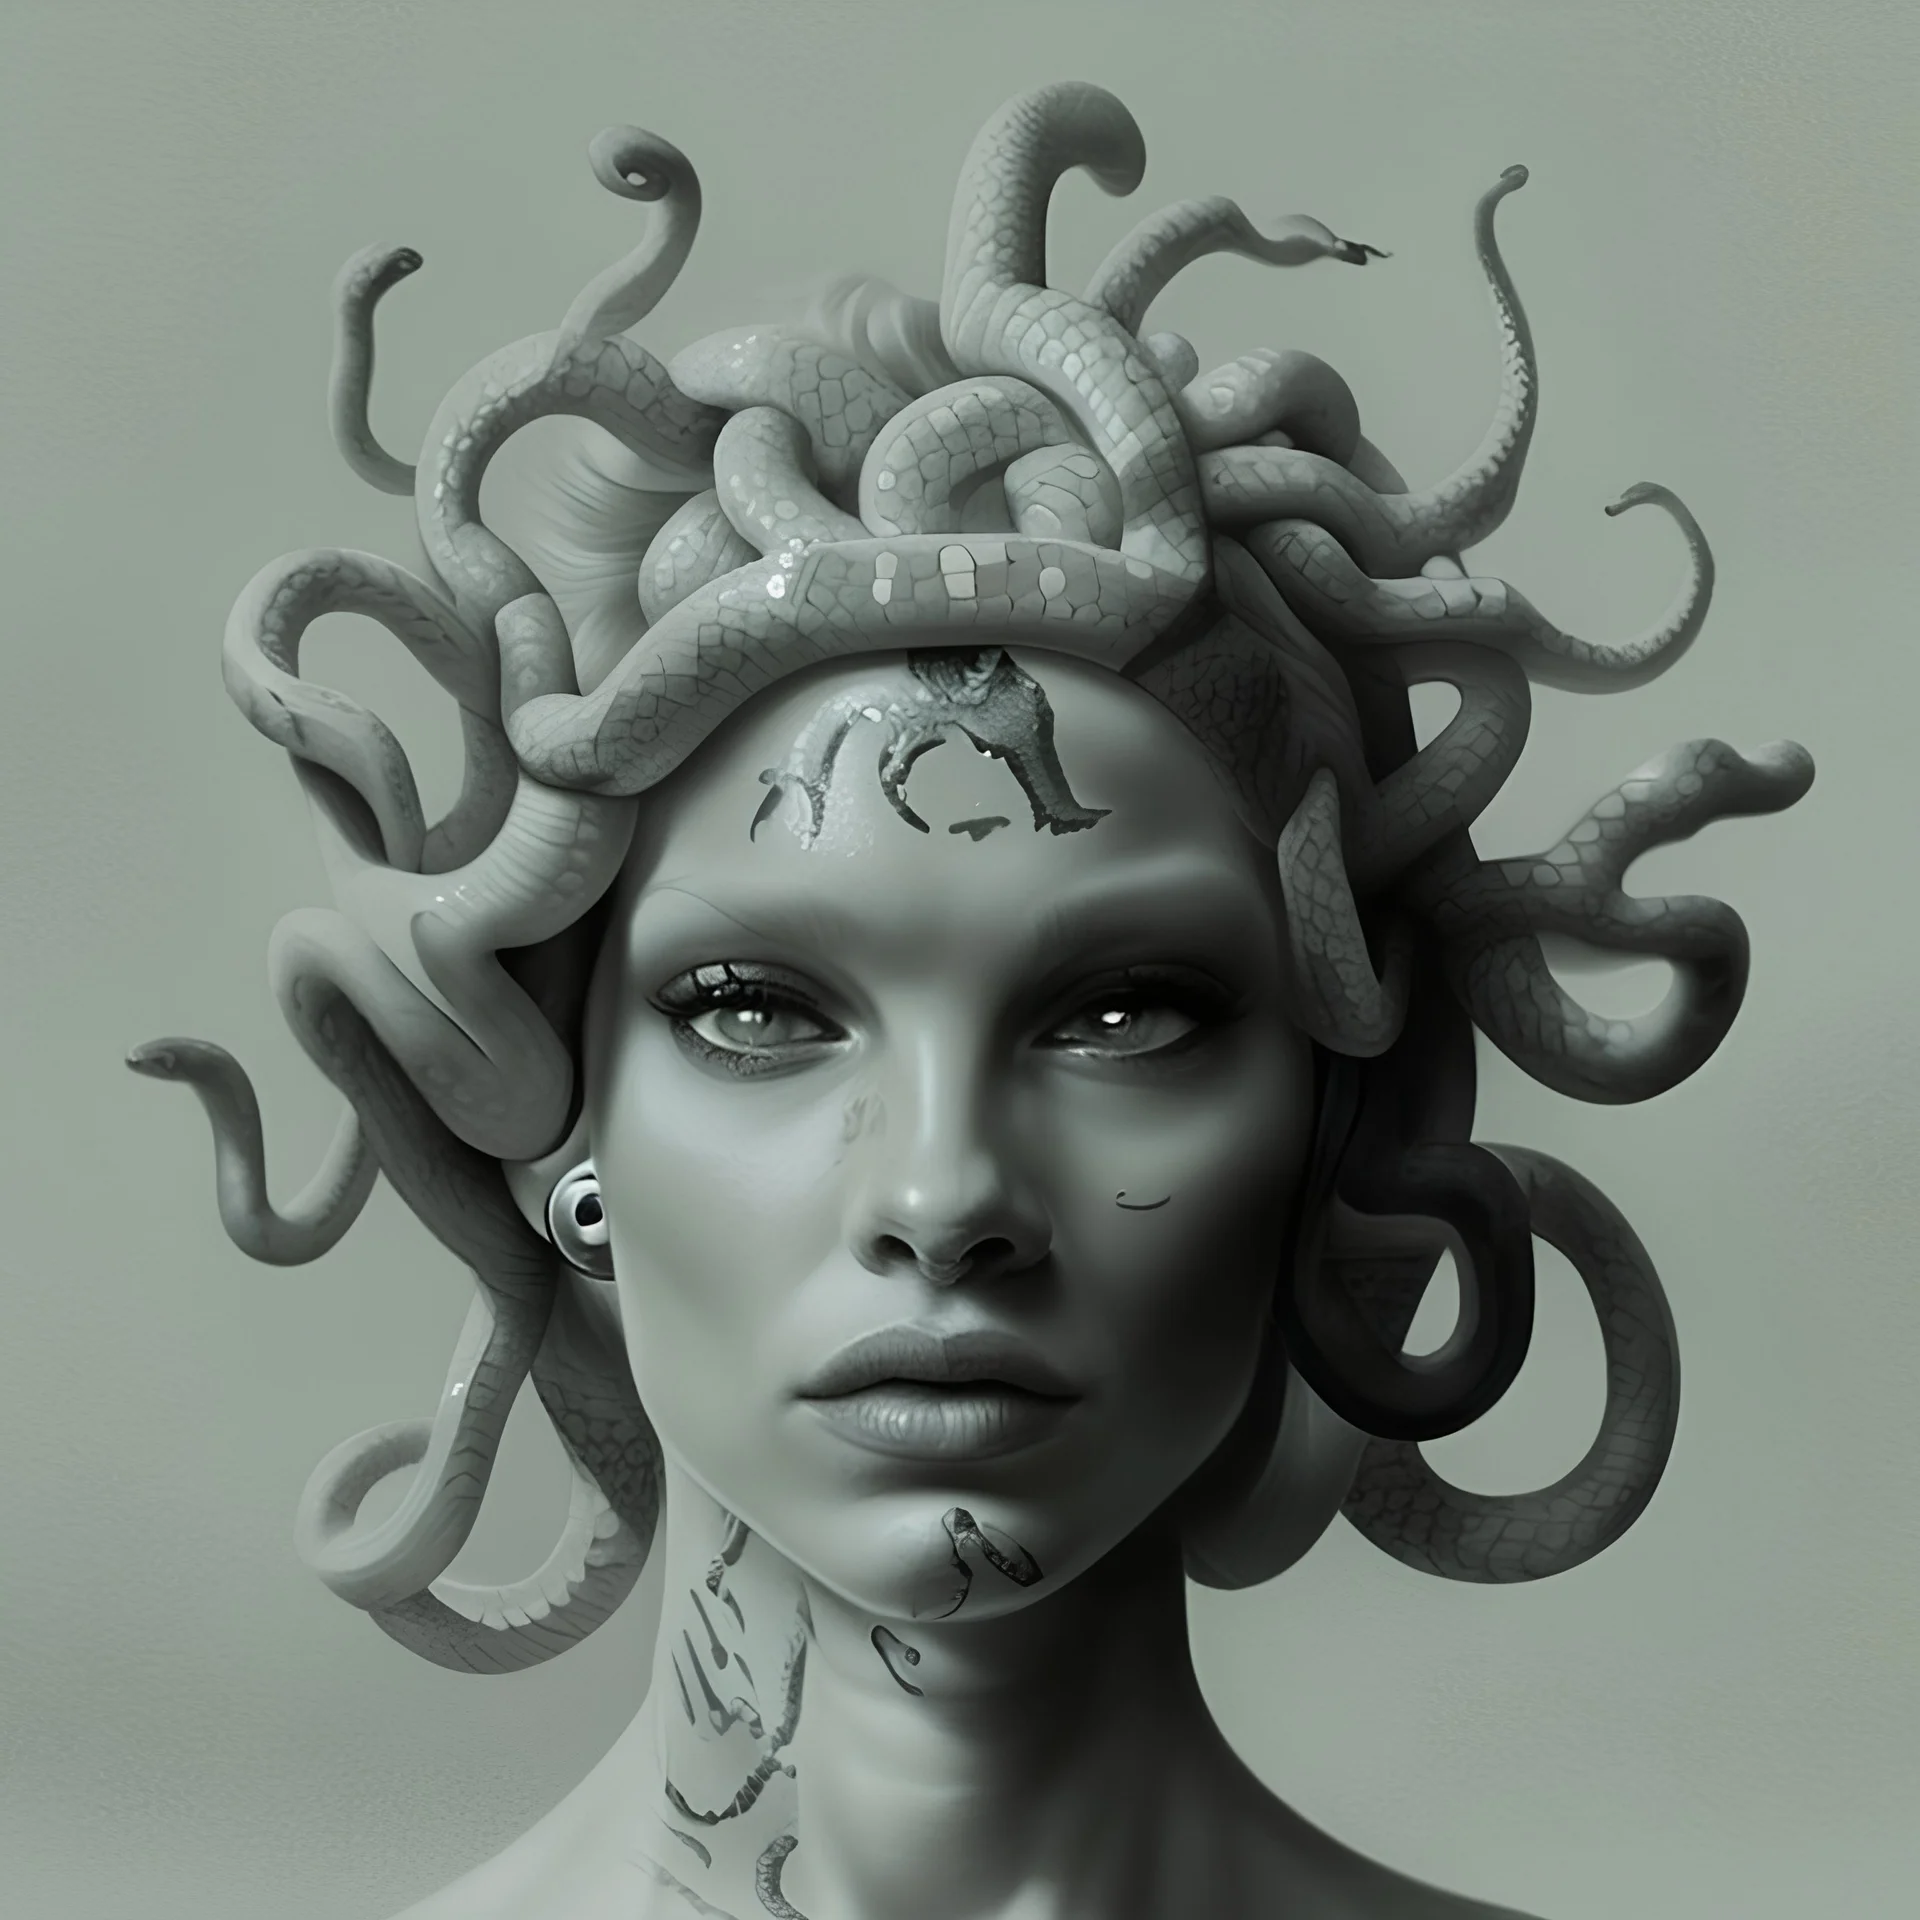 Medusa woman with headphones and tattoos and snakes on his head